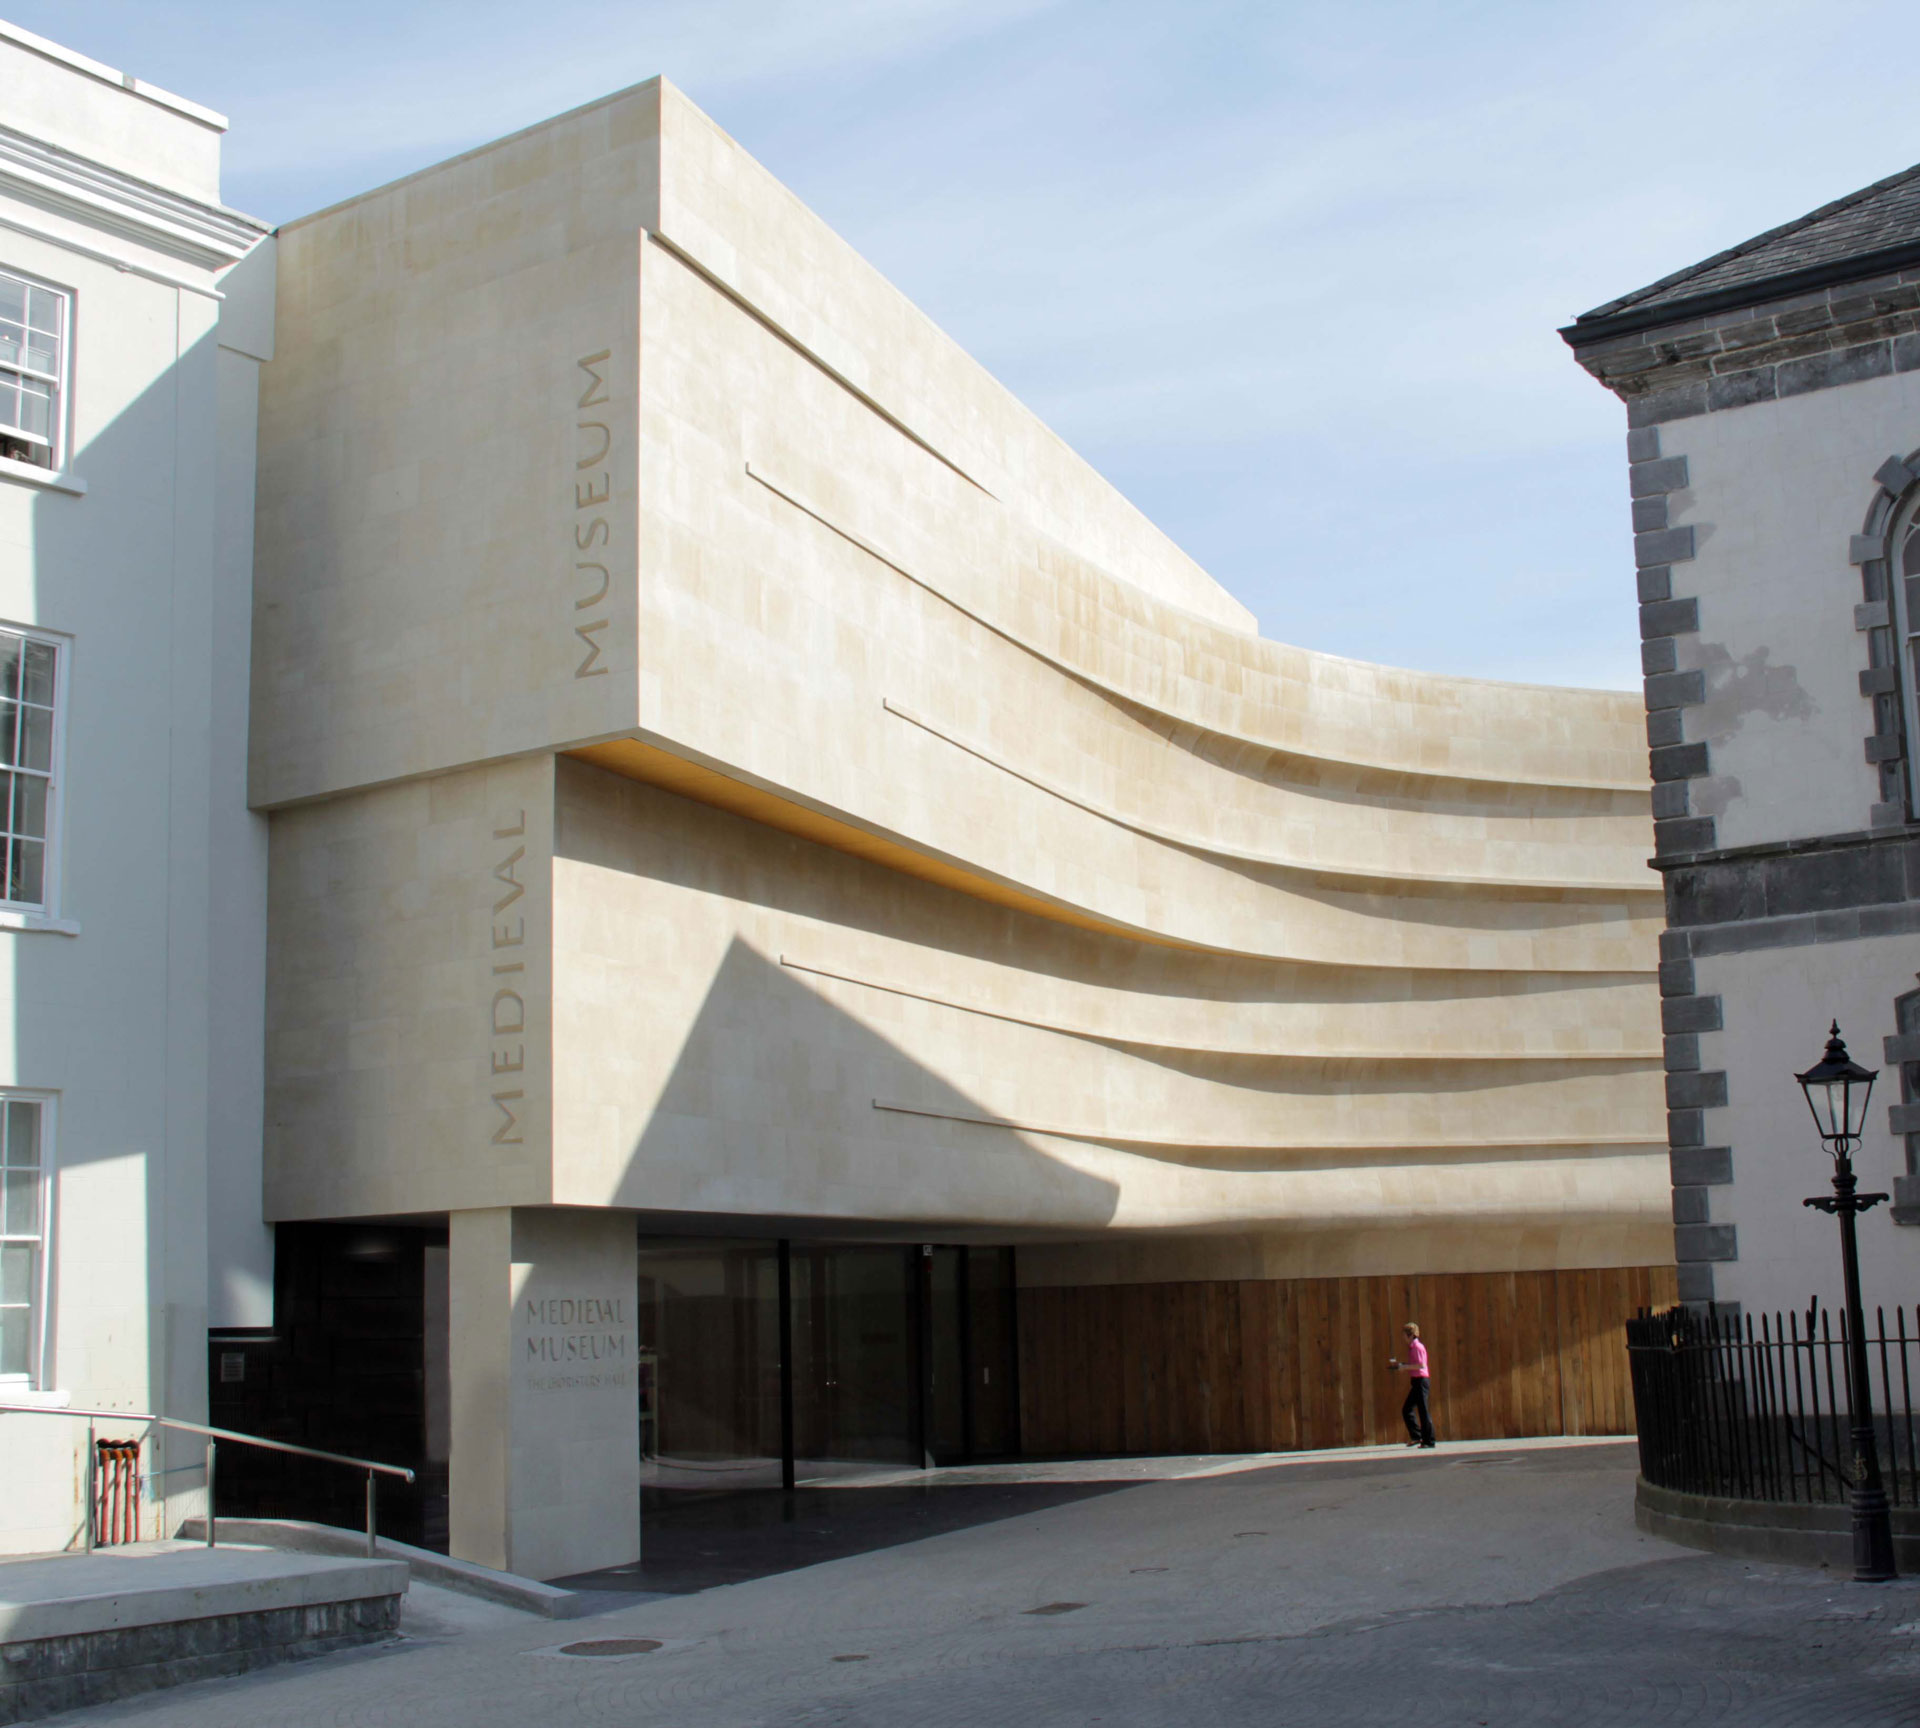 Waterford Medieval Museum. Client, Waterford City Council. Engineer, Frank Fox & Associates. Architect, Waterford City Council